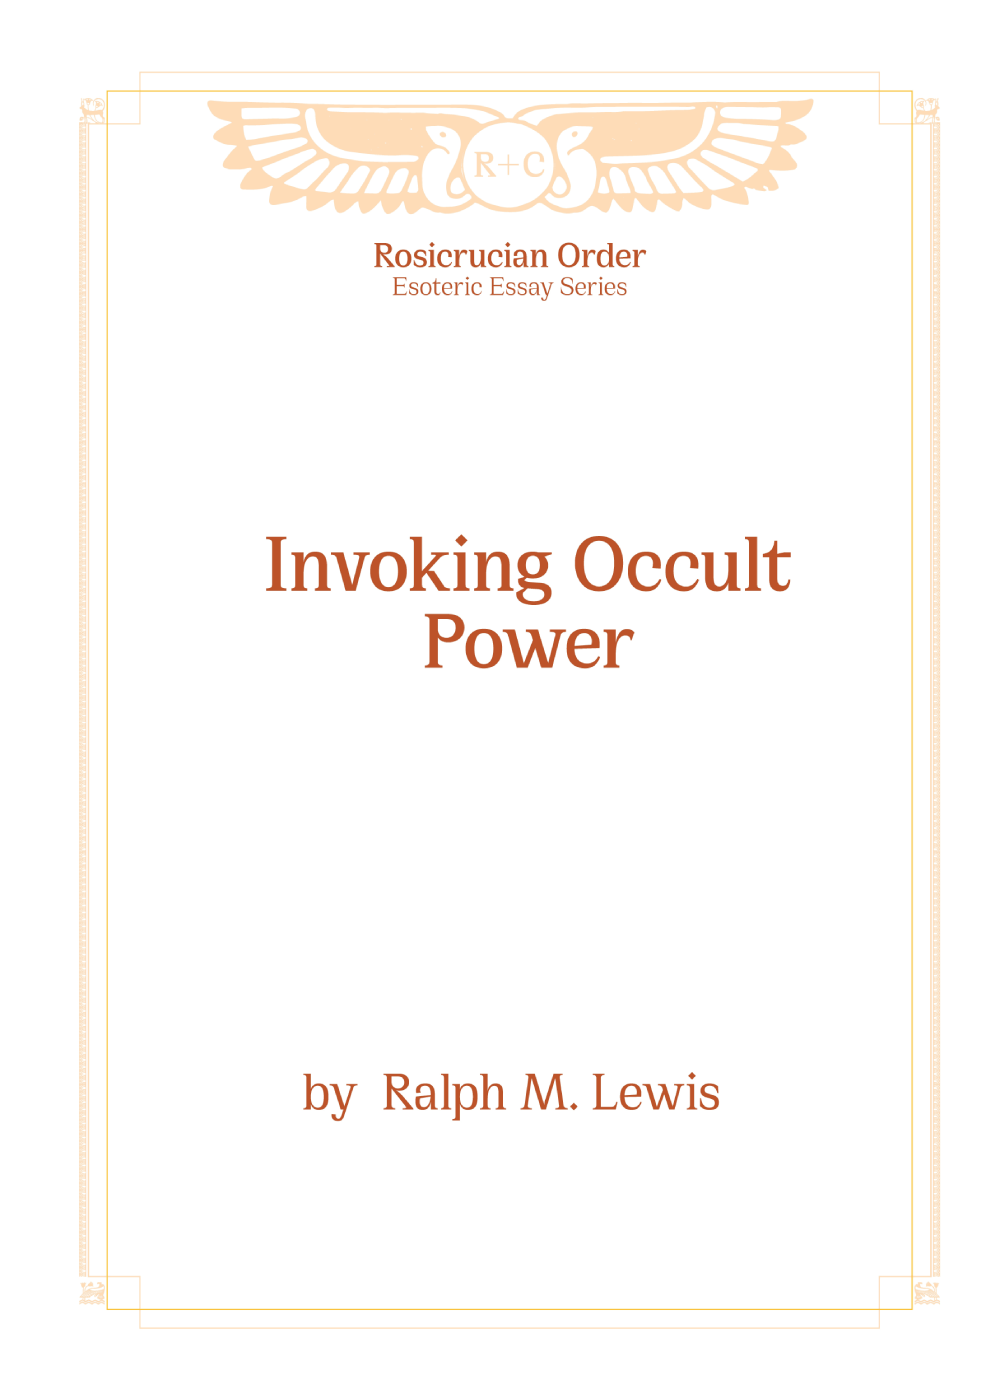 Esoteric Essays - Invoking Occult Power